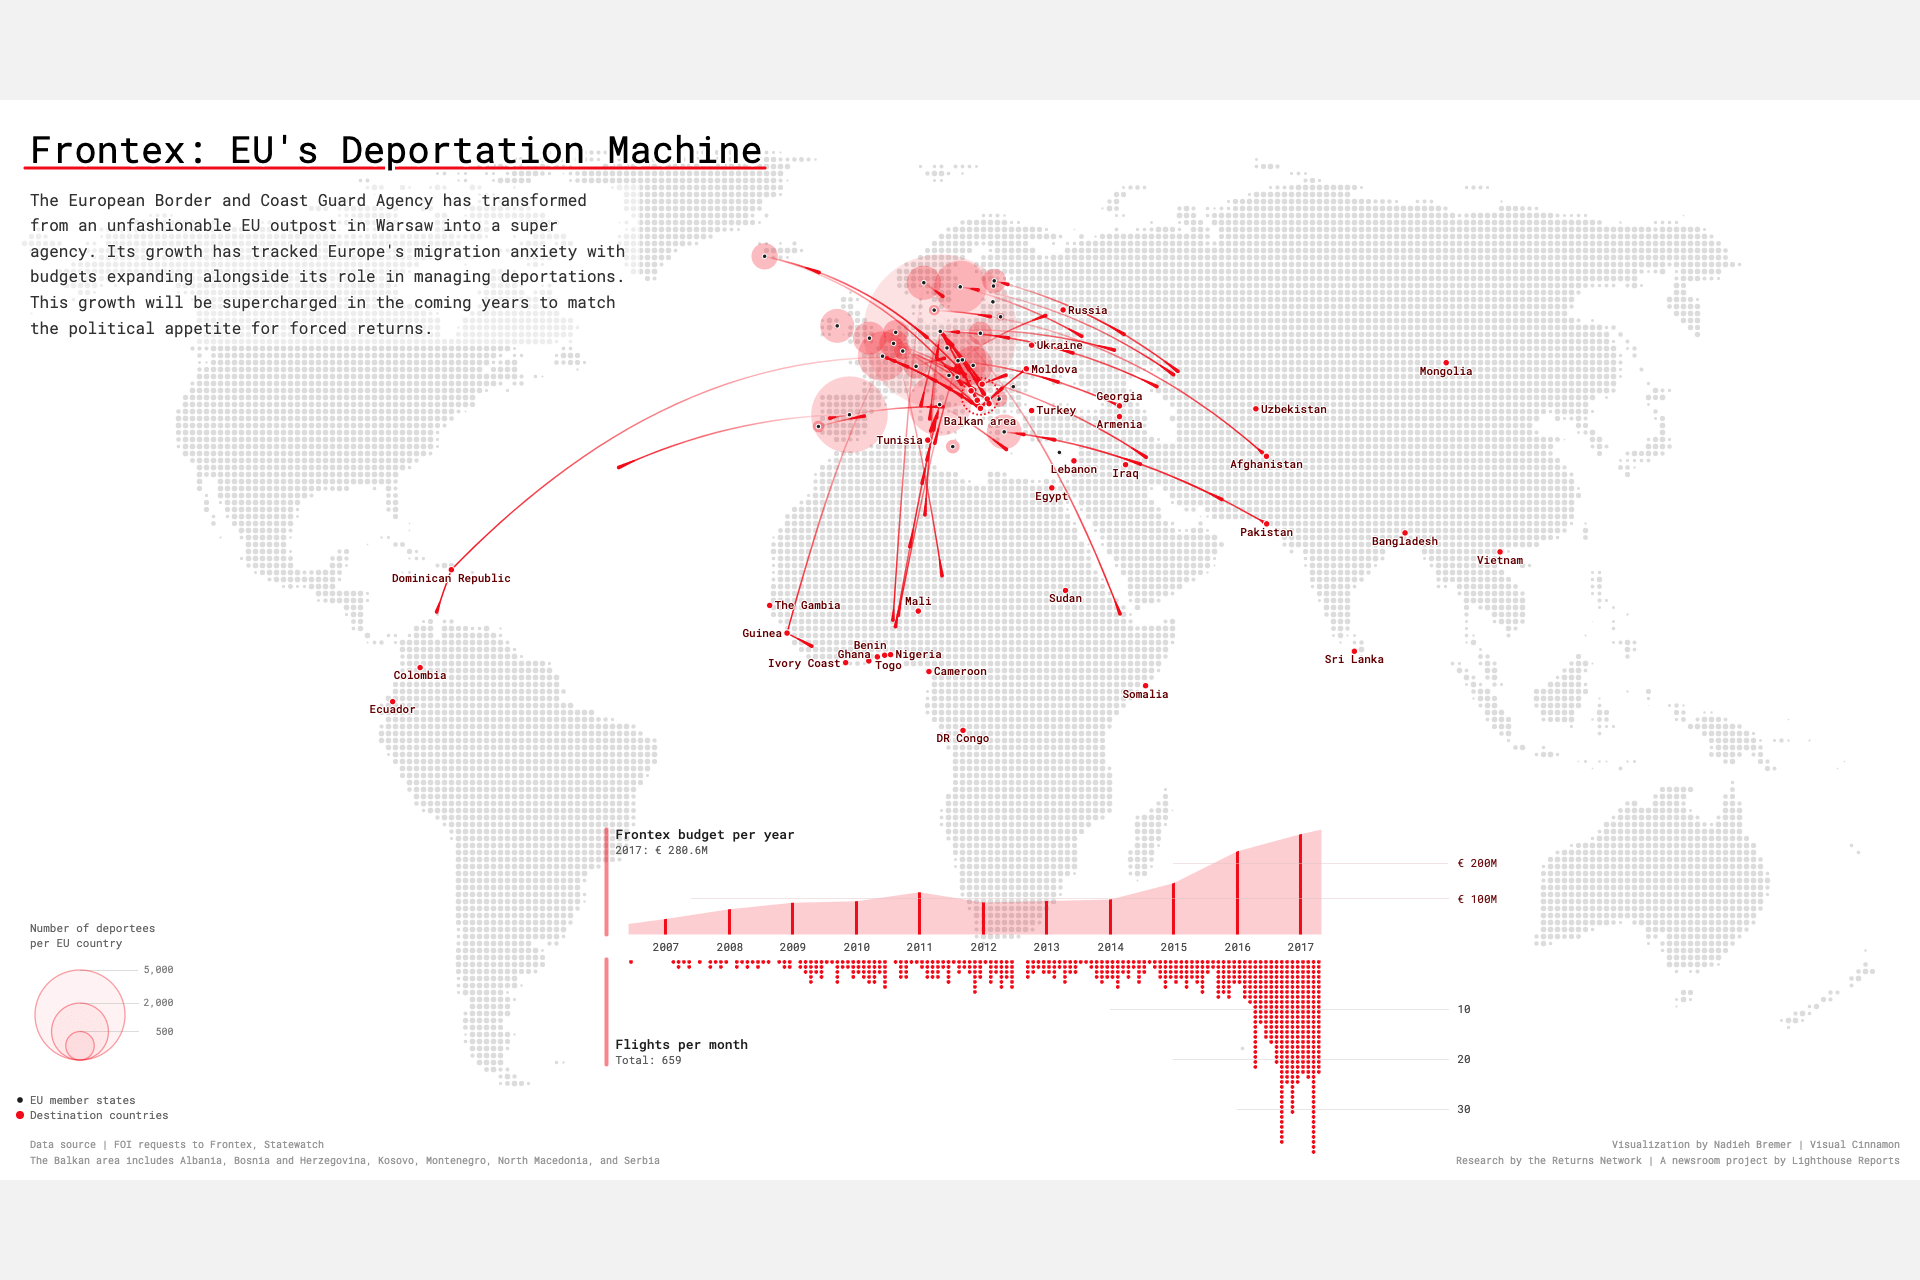 The animation of the deportations done by Frontex around 2017